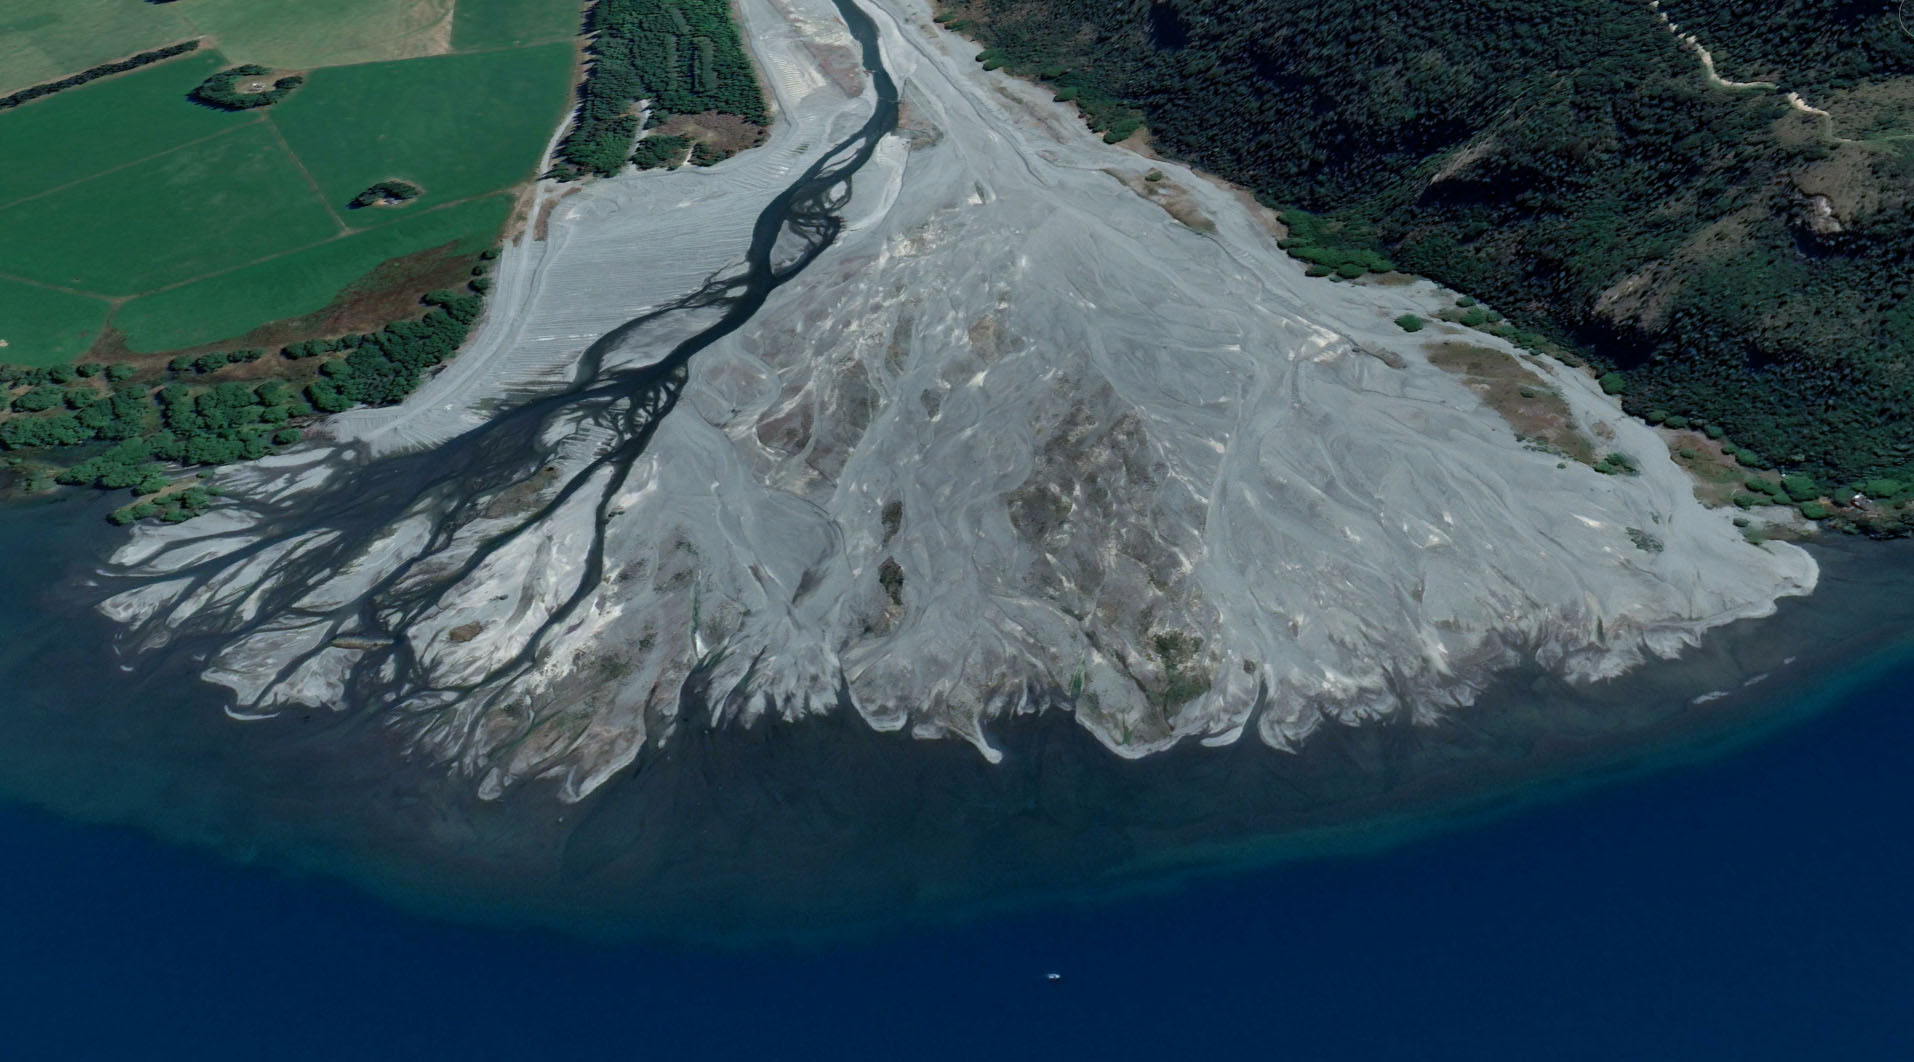 Fig. 4. The Harper River flowing into Lake Coleridge is a good visual analogy of how braided rivers transported sediment from the mountains and deposited it to coastal waters. Over millions of years, as the rivers deposited too much sediment in one place, they changed course to lower-lying areas. Eventually, the land they formed joined into 'megafans', creating what we now call the Canterbury Plains (Image: Google Earth June 2021). Today, braided rivers that have been confined by levees can only deposit these gravels within their confined spaces, eventually building up the riverbed higher than the surrounding land. If the levee breaks during high water flows, an avulsion can happen, leading to widescale flooding with few options to return the water to the river because it's higher than the flooded lands.